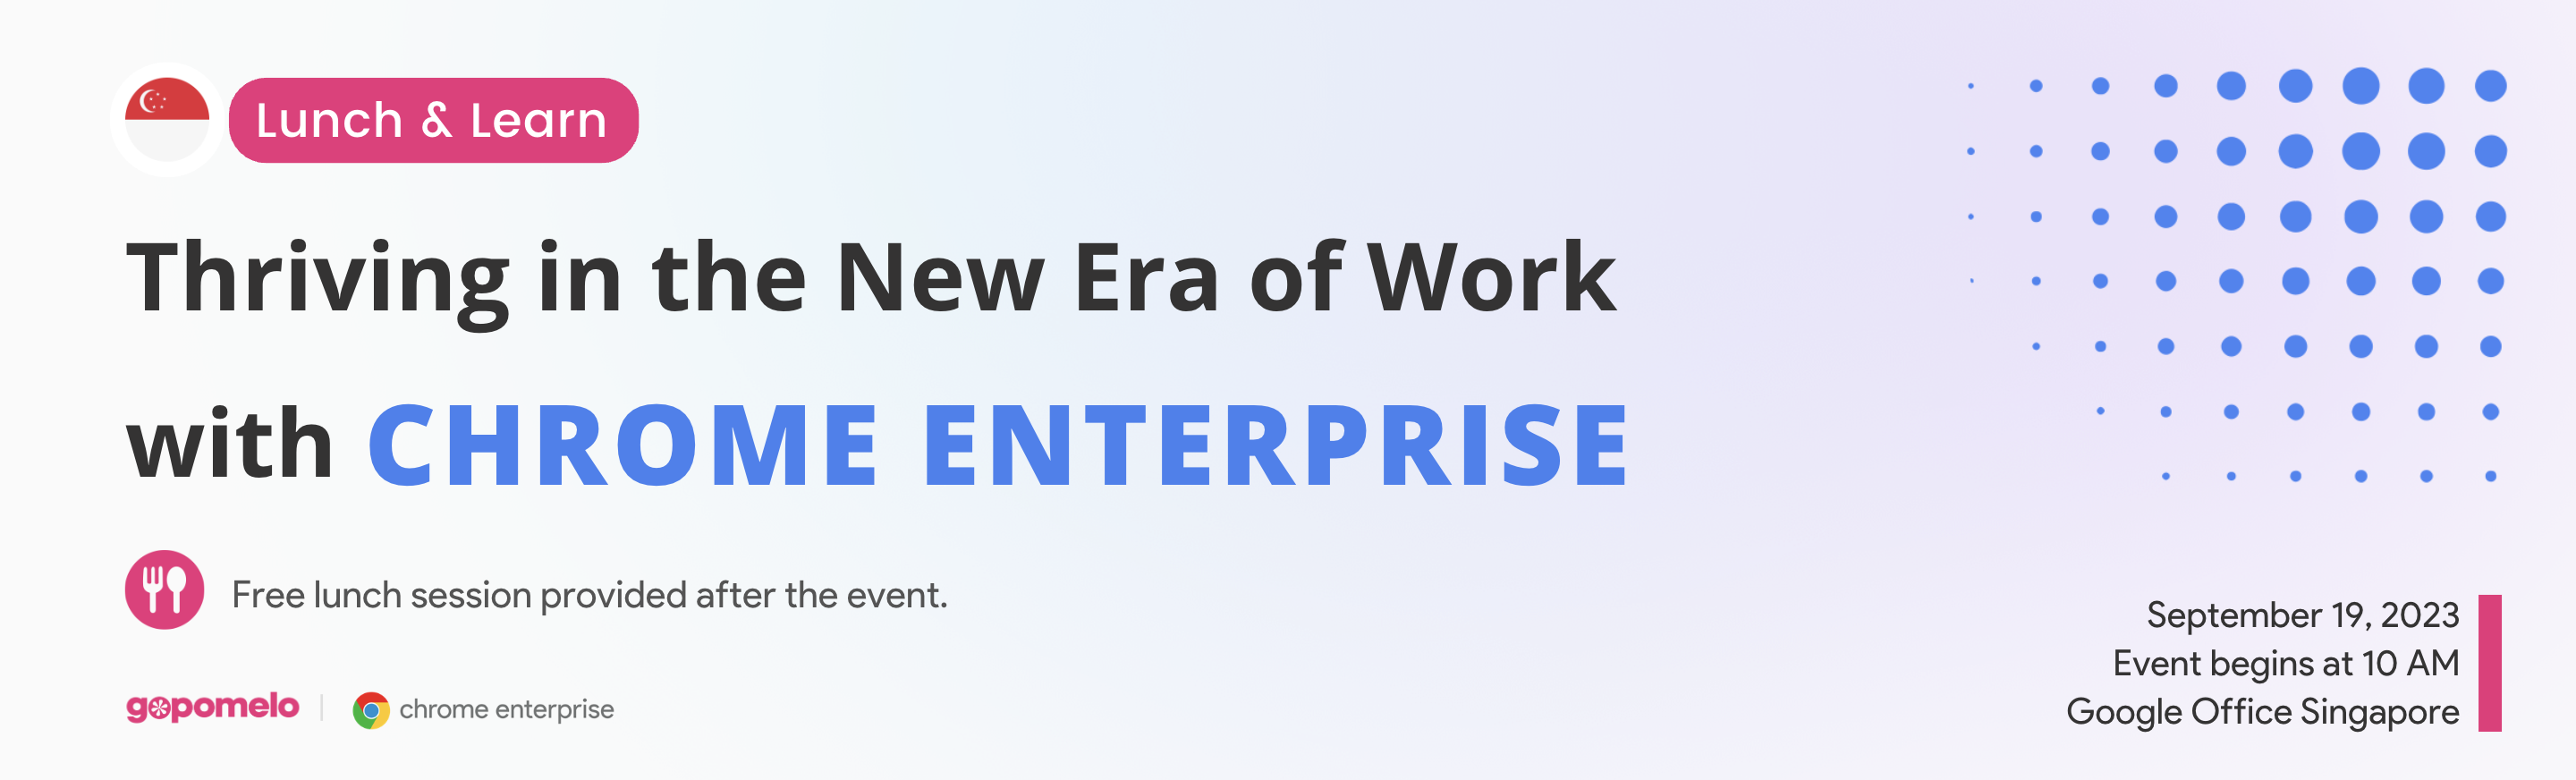 [Singapore] Lunch & Learn: Thriving in the New Era of Work with Chrome Enterprise